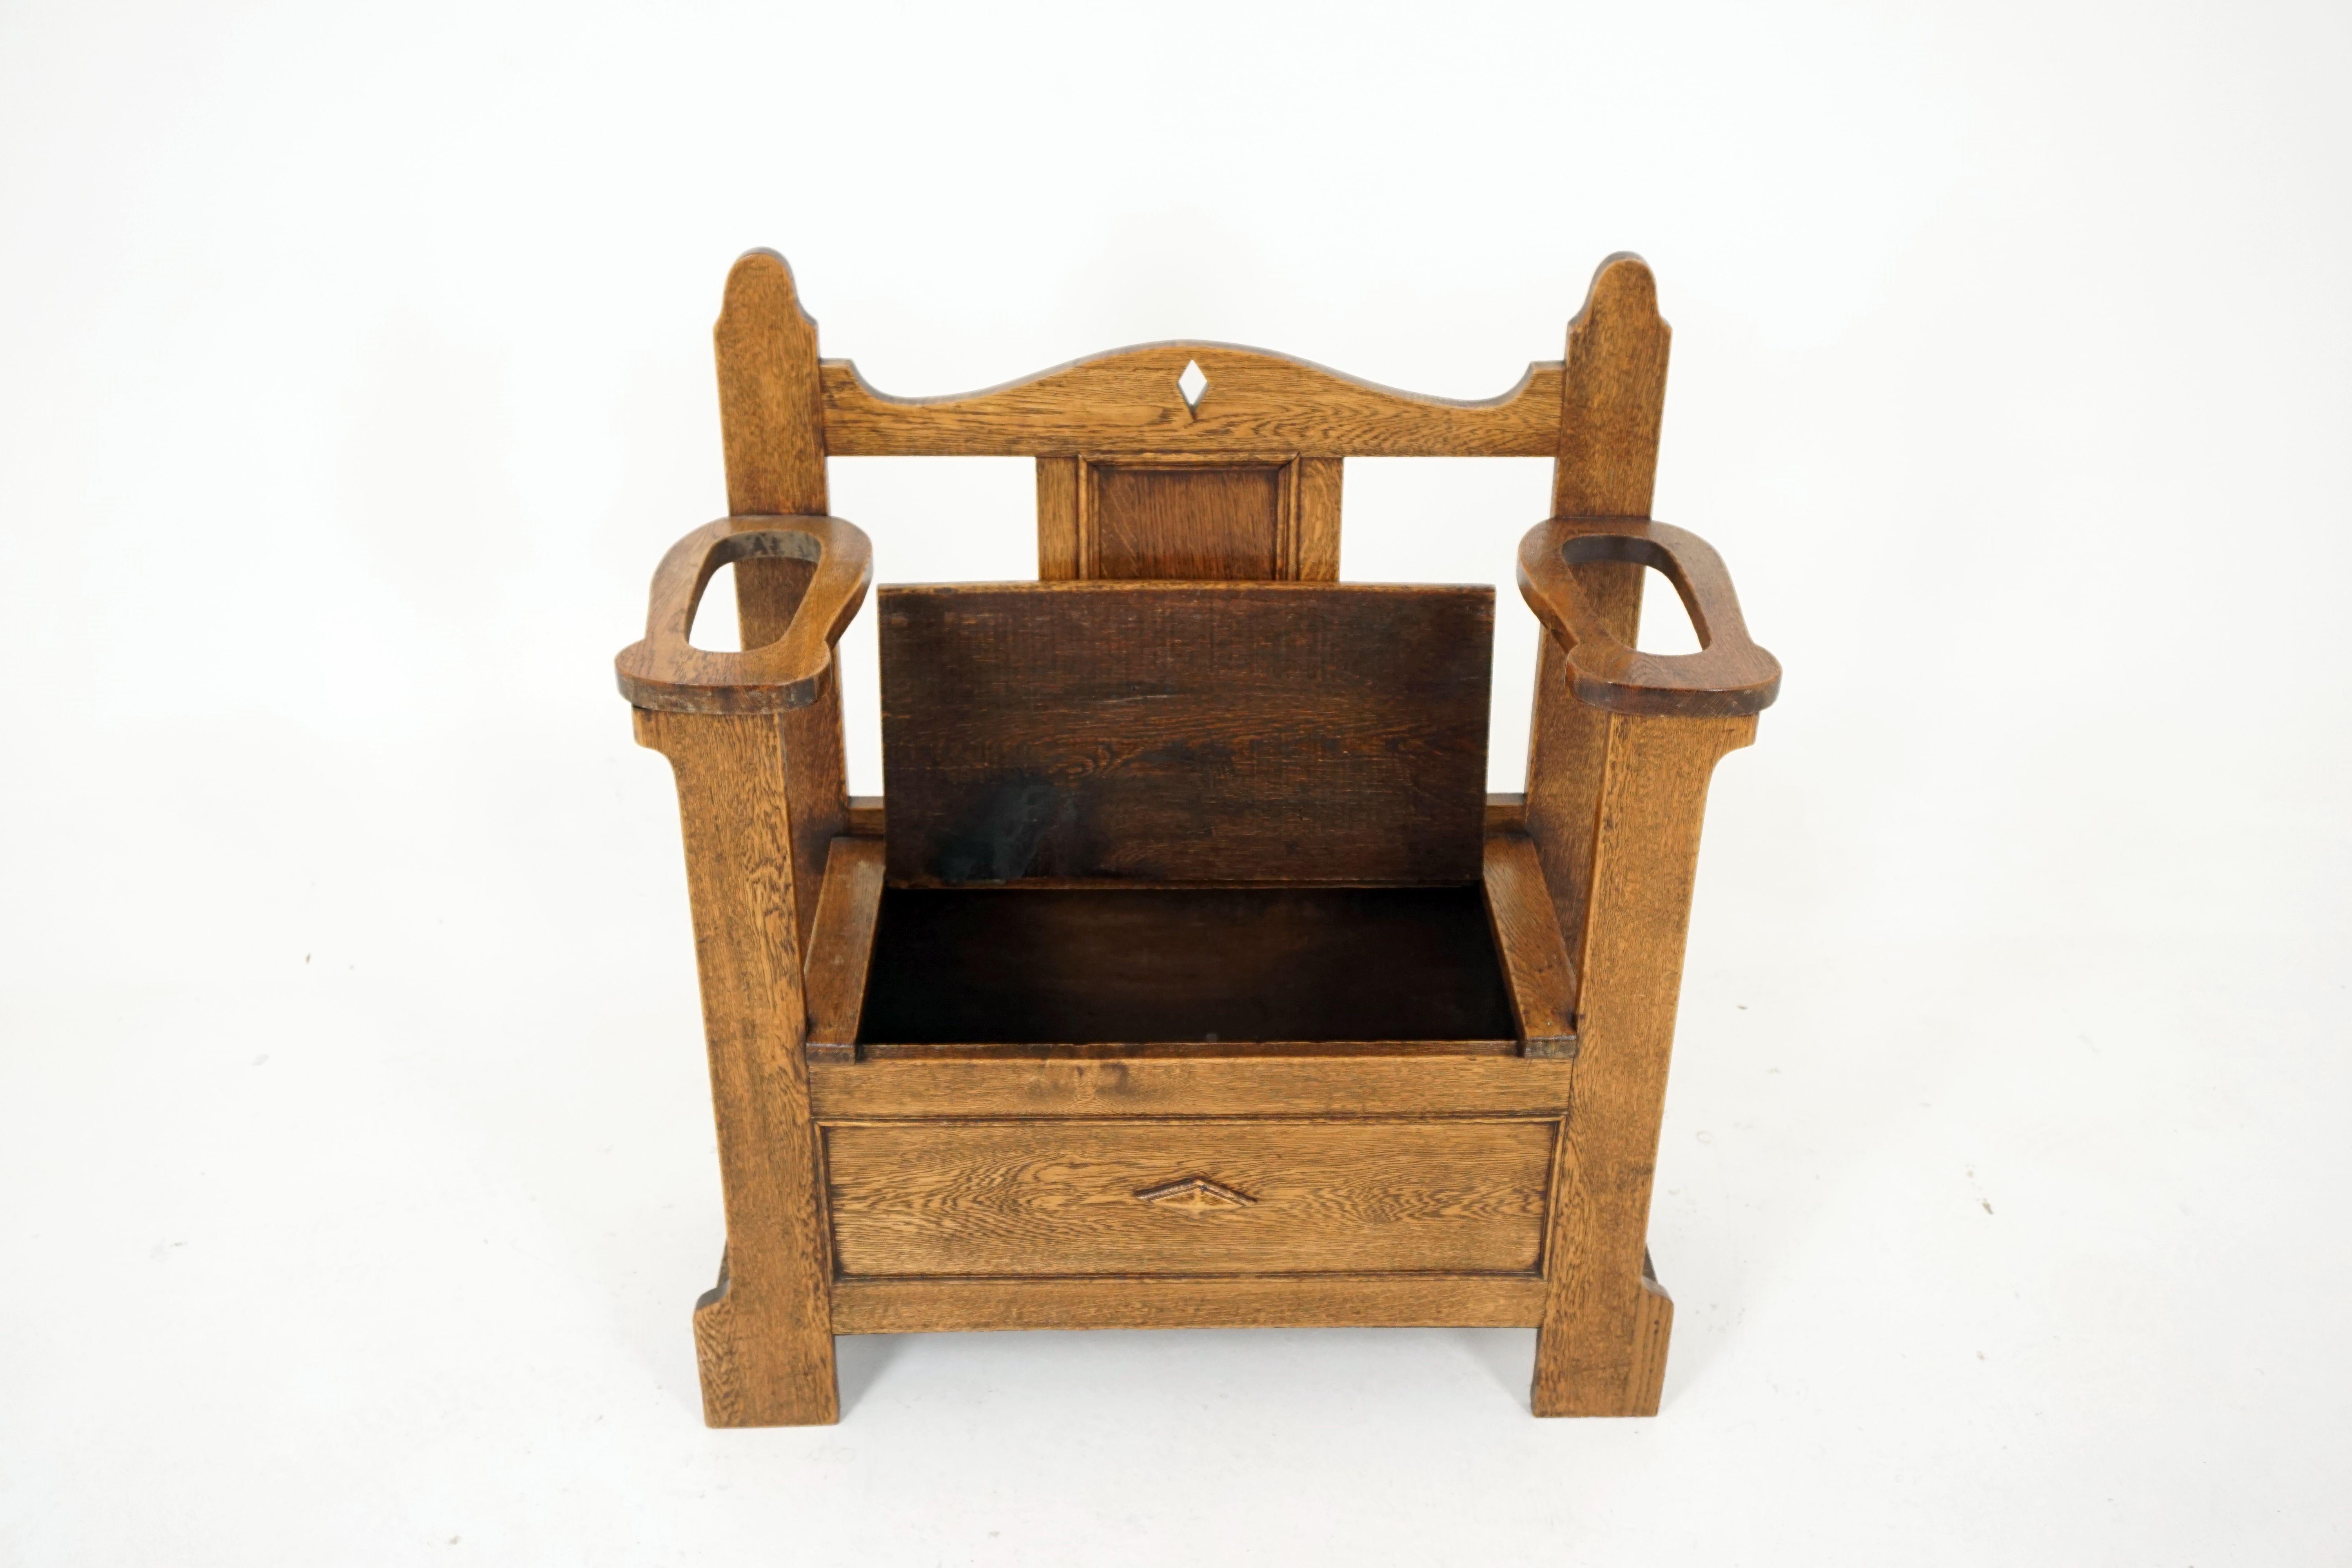 Antique oak hall seat, Arts & Crafts, with umbrella or stick stand, antique furniture, Scotland 1910, B2010

Scotland, 1910
Solid oak
Pierced diamond to the back
Panel below
Plank seat lifts up with storage for shoes, etc.
Pierced arms to the